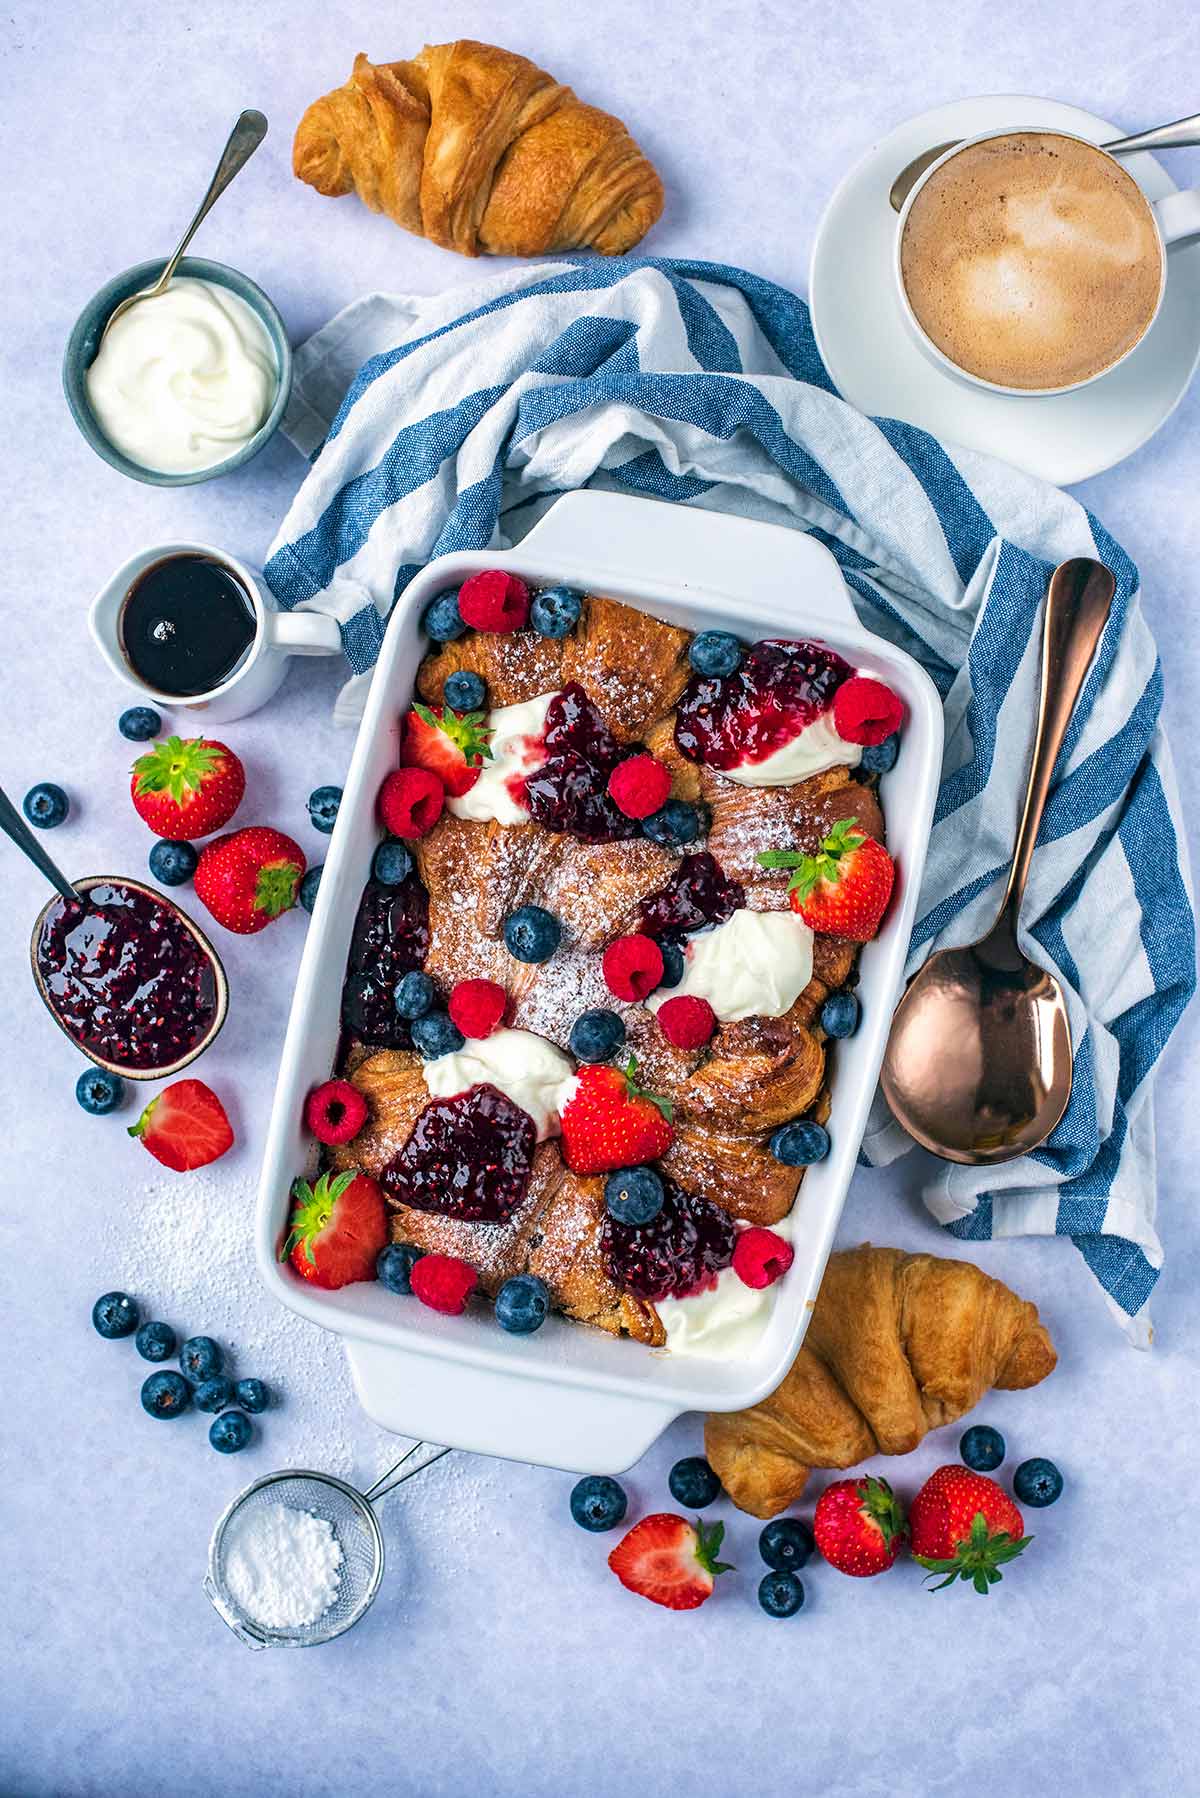 A baking dish contining bked croissants topped with yogurt and berries.